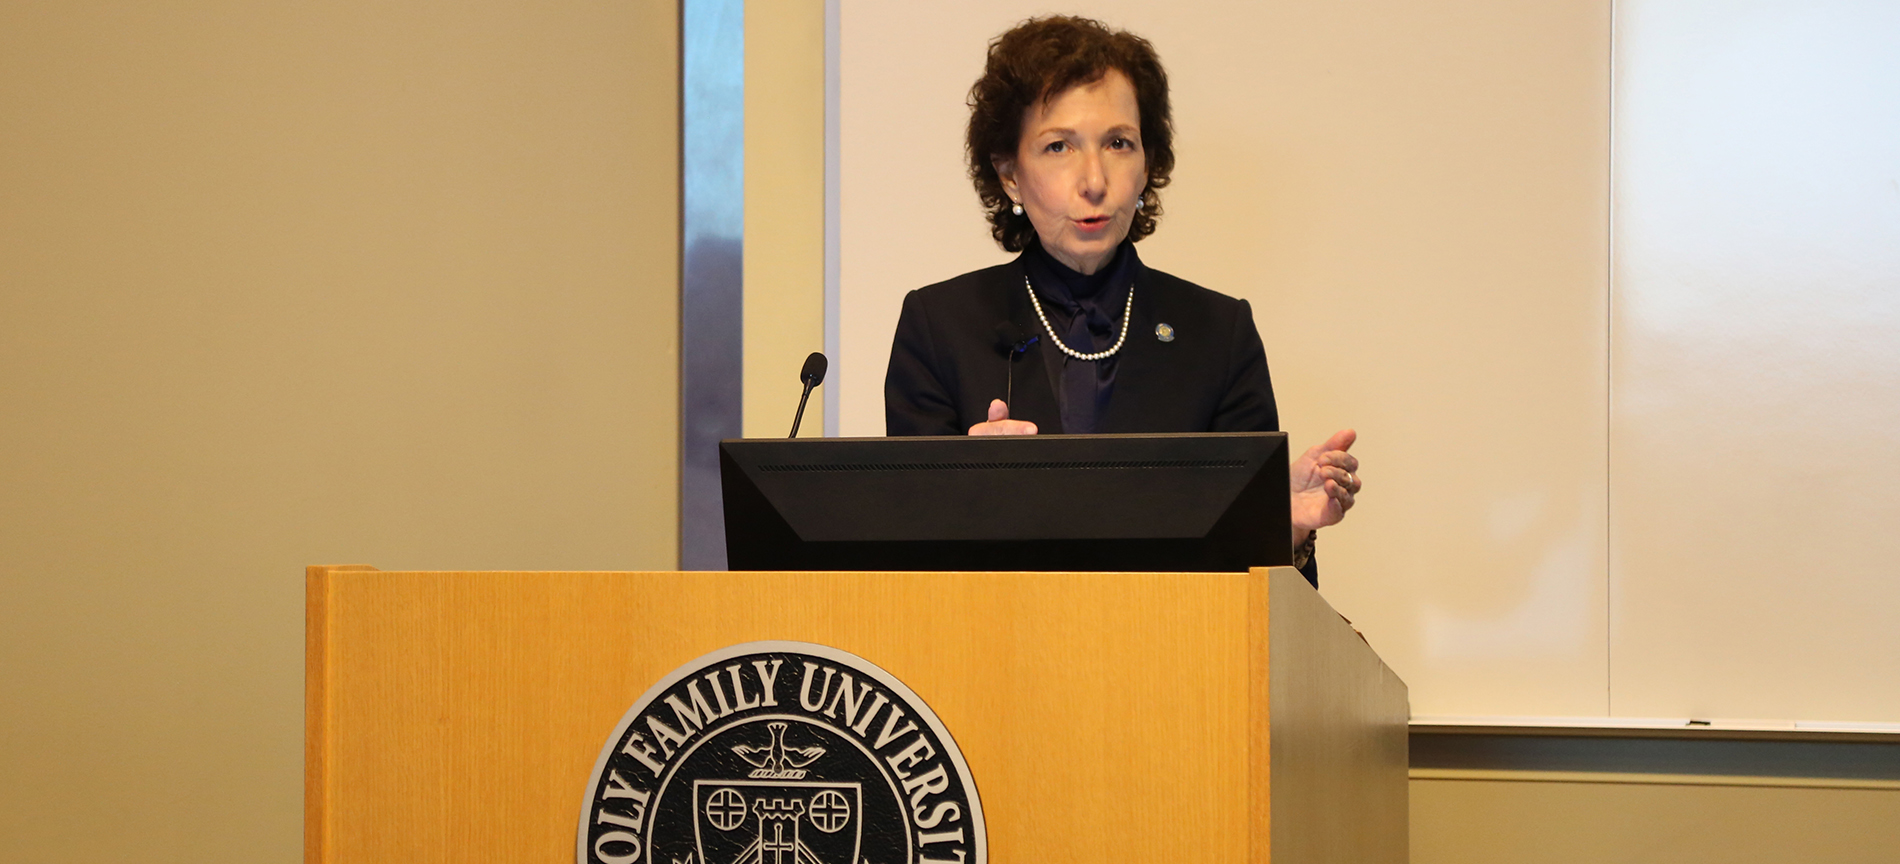 Dr Prisco's State of the University Address